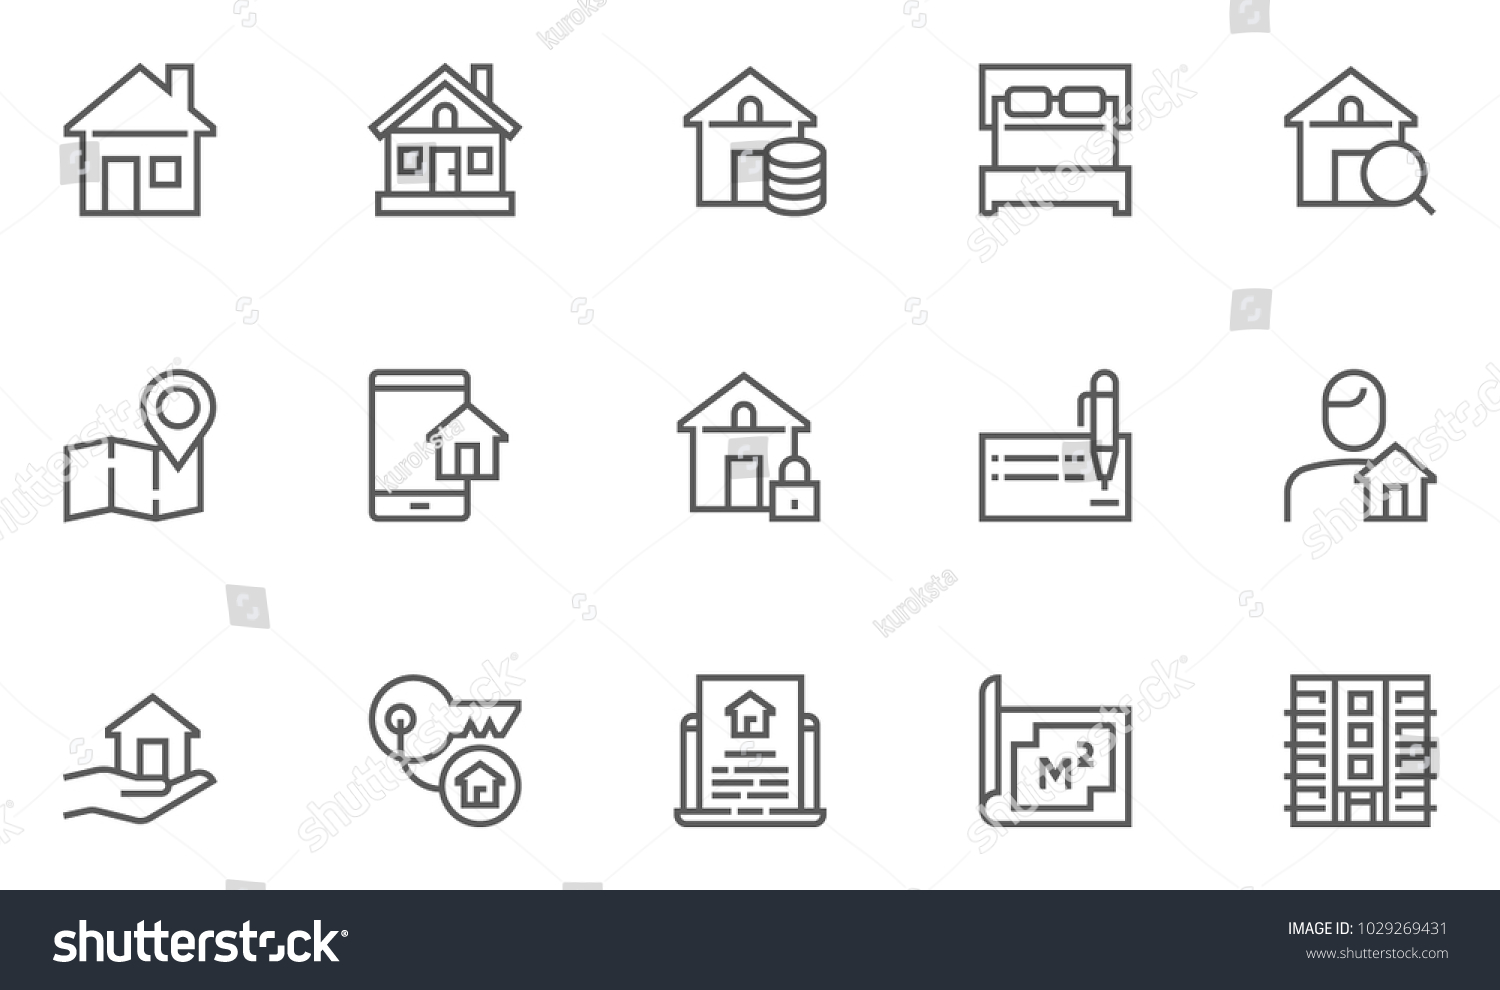 SVG of Real Estate Vector Flat Line Icons Set. Map, Plan, House, Apartment, Realtor. Editable Stroke. 48x48 Pixel Perfect. svg